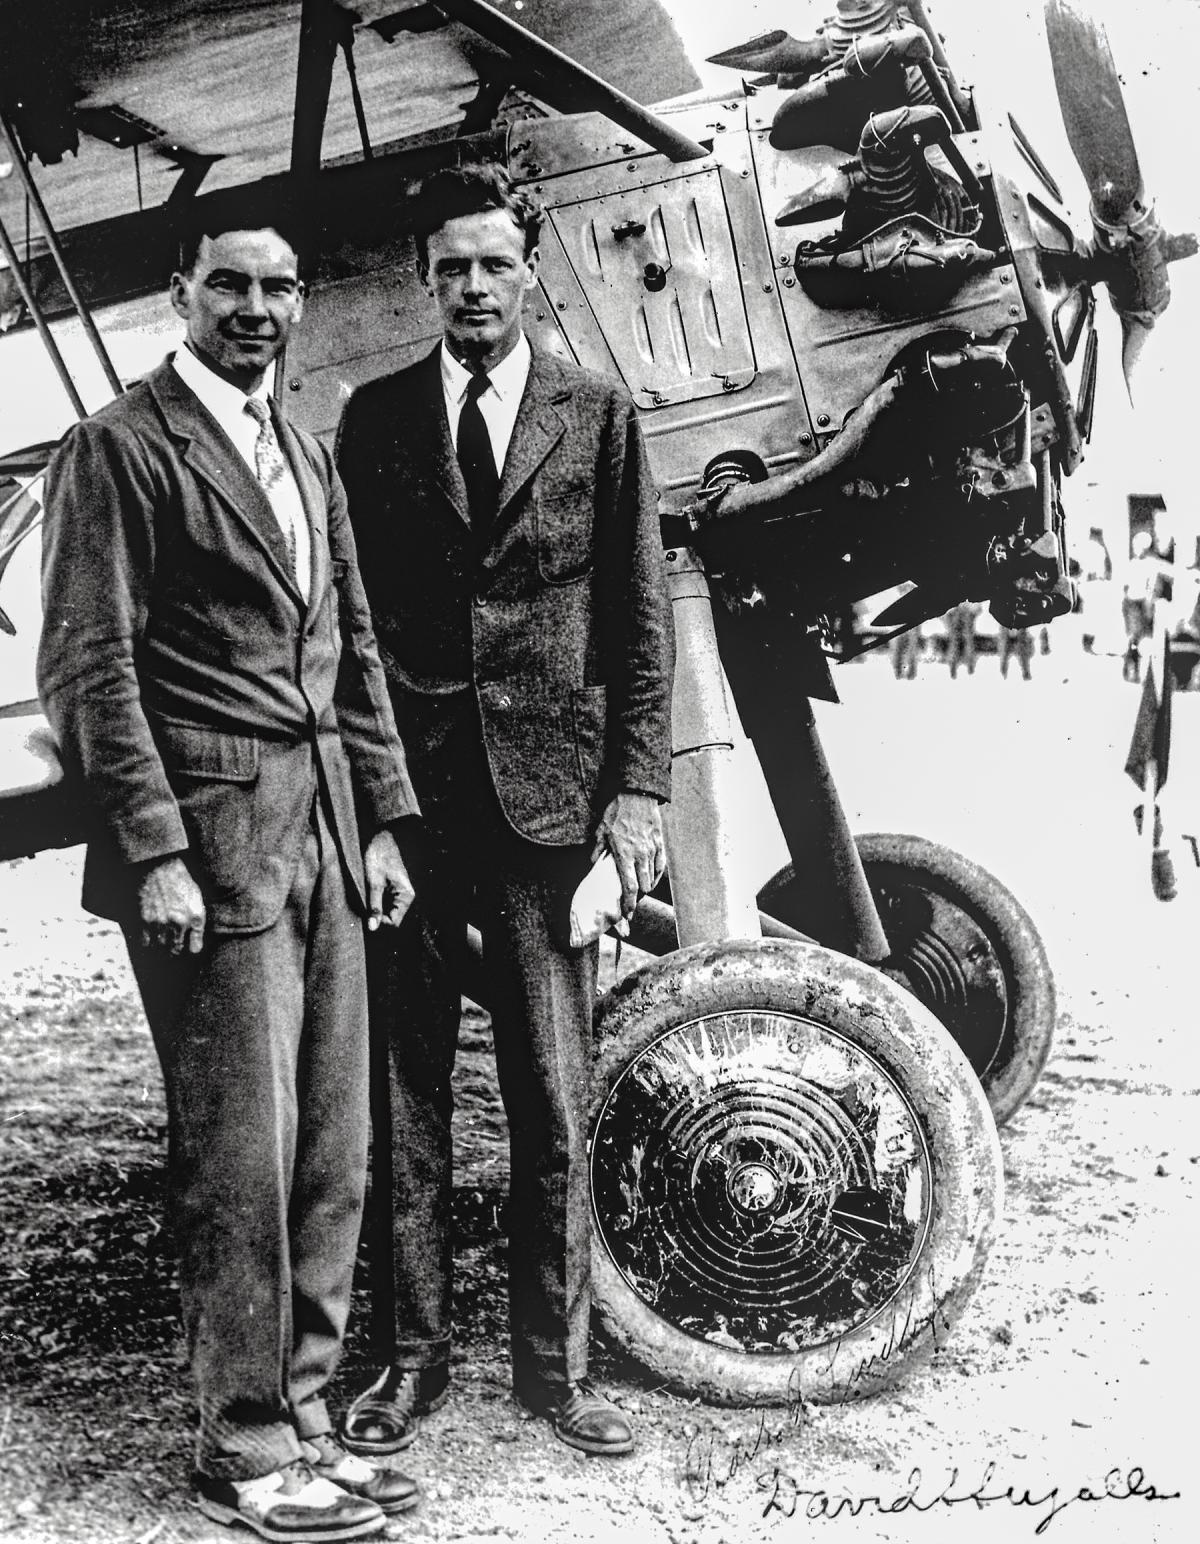 Assistant Secretary David Ingalls, left, and aviation pioneer Charles Lindbergh stand in front of a U.S. Navy “High Hat” aircraft